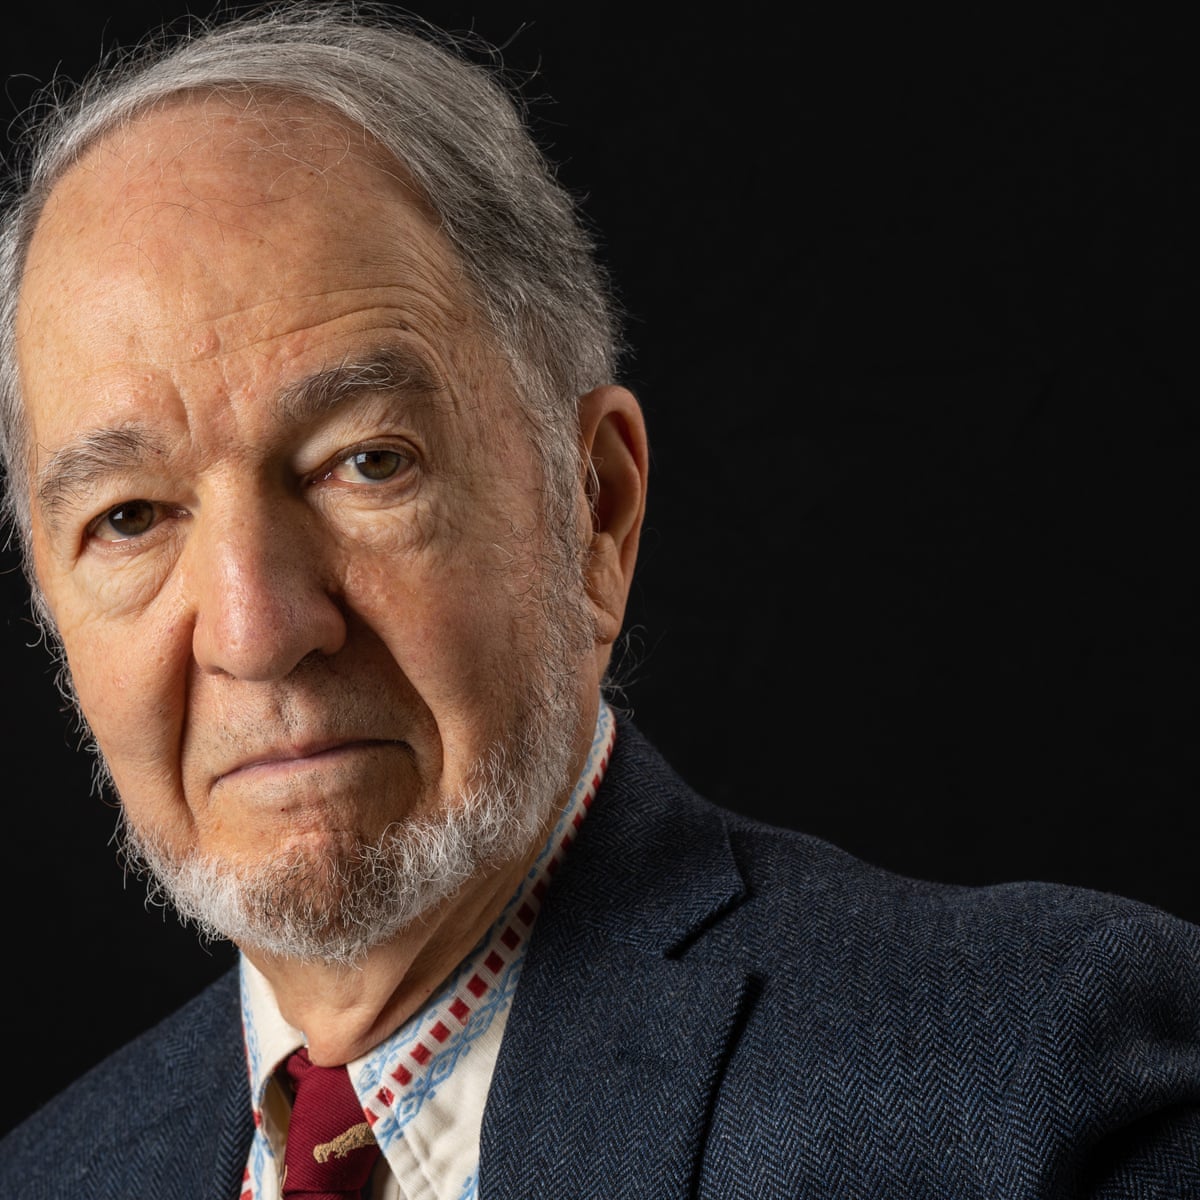 Jared Diamond: So how do states recover from crises? Same way as people do | Jared Diamond | The Guardian